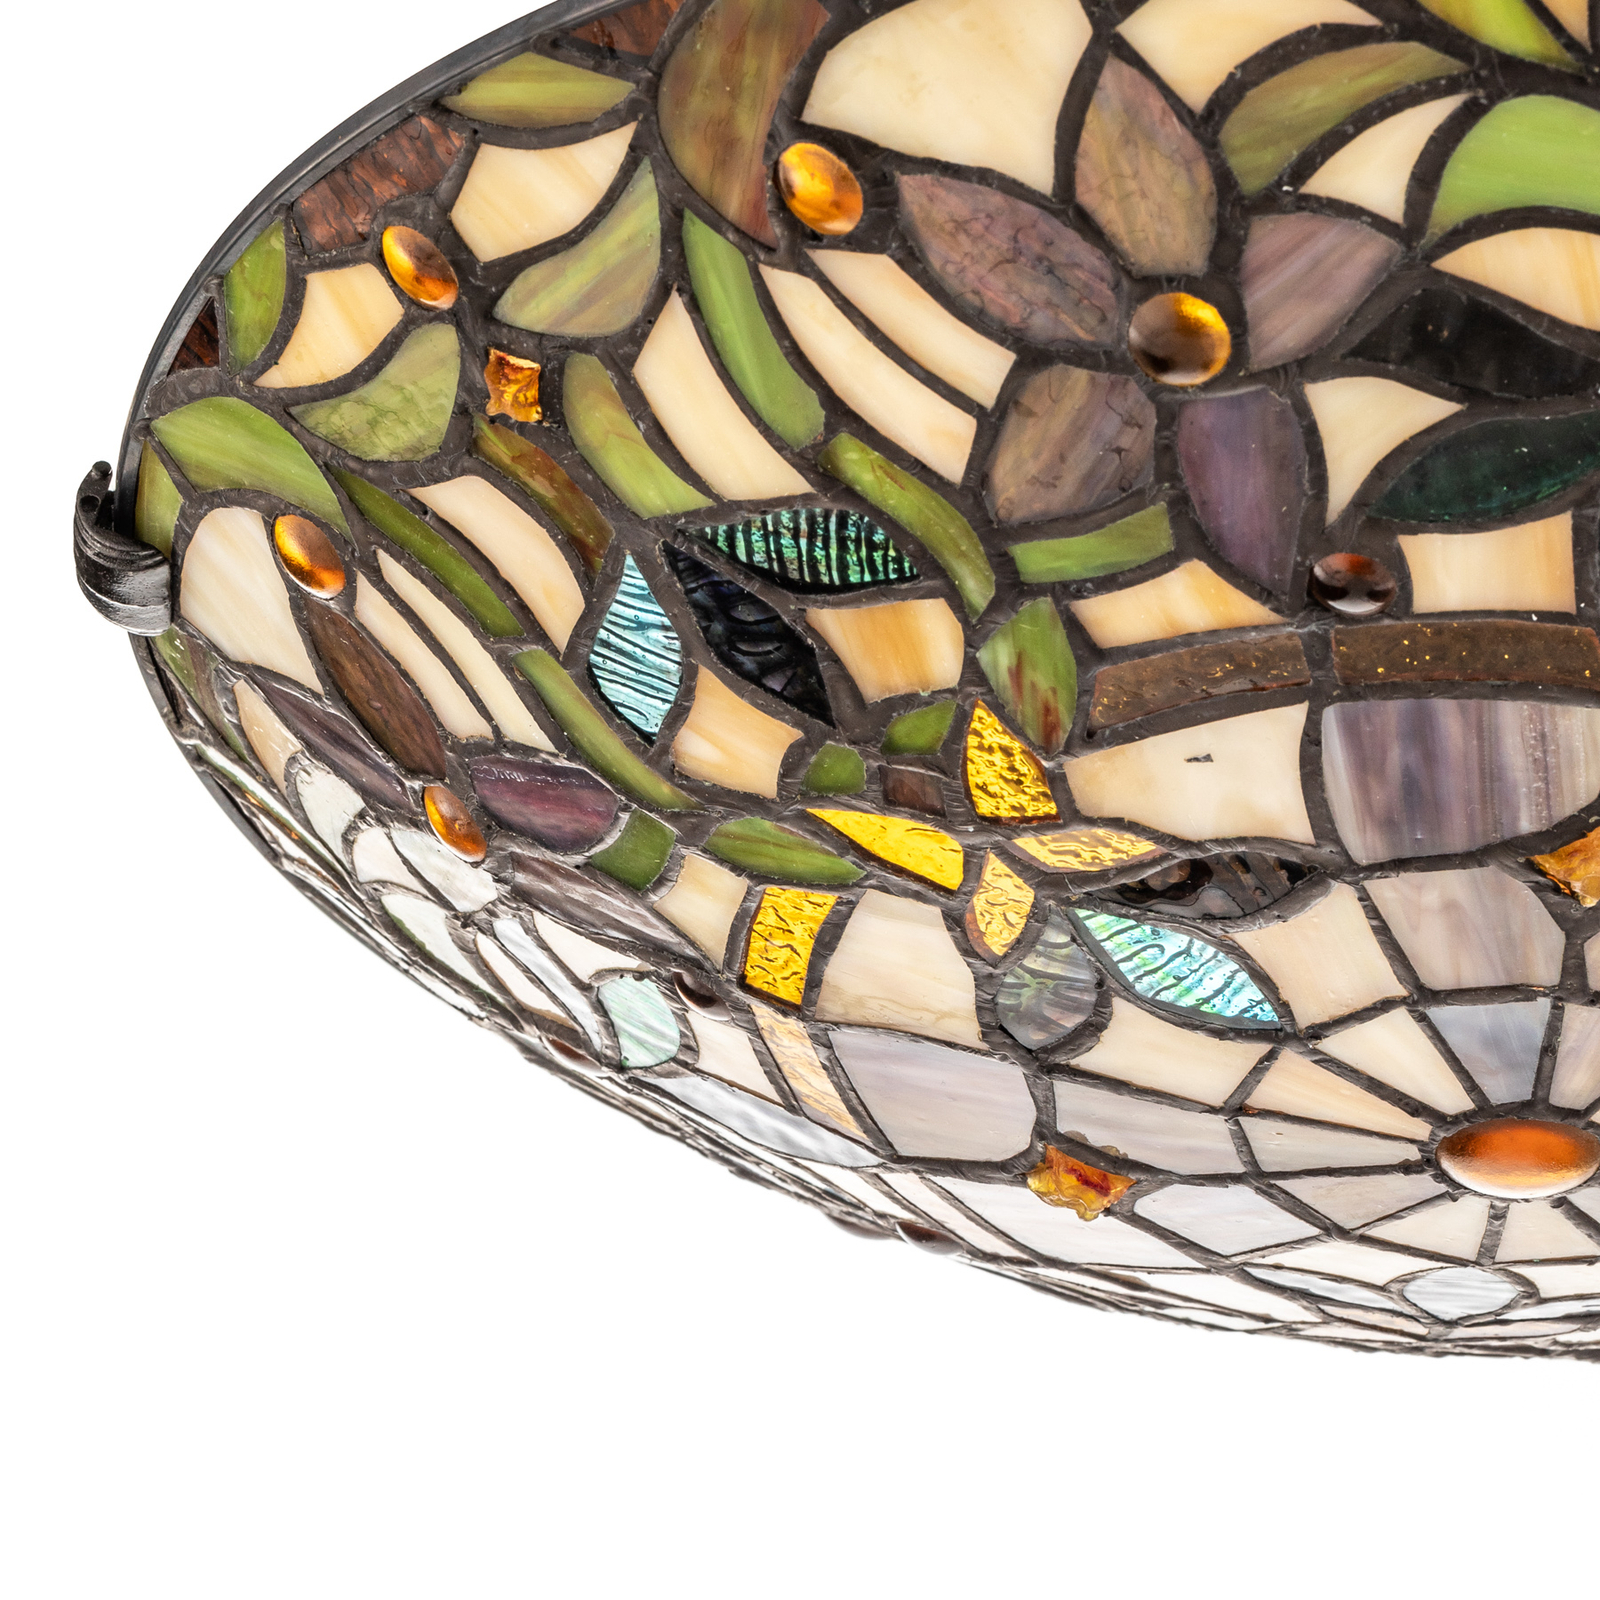 Unusual ceiling lamp Kami in a Tiffany style